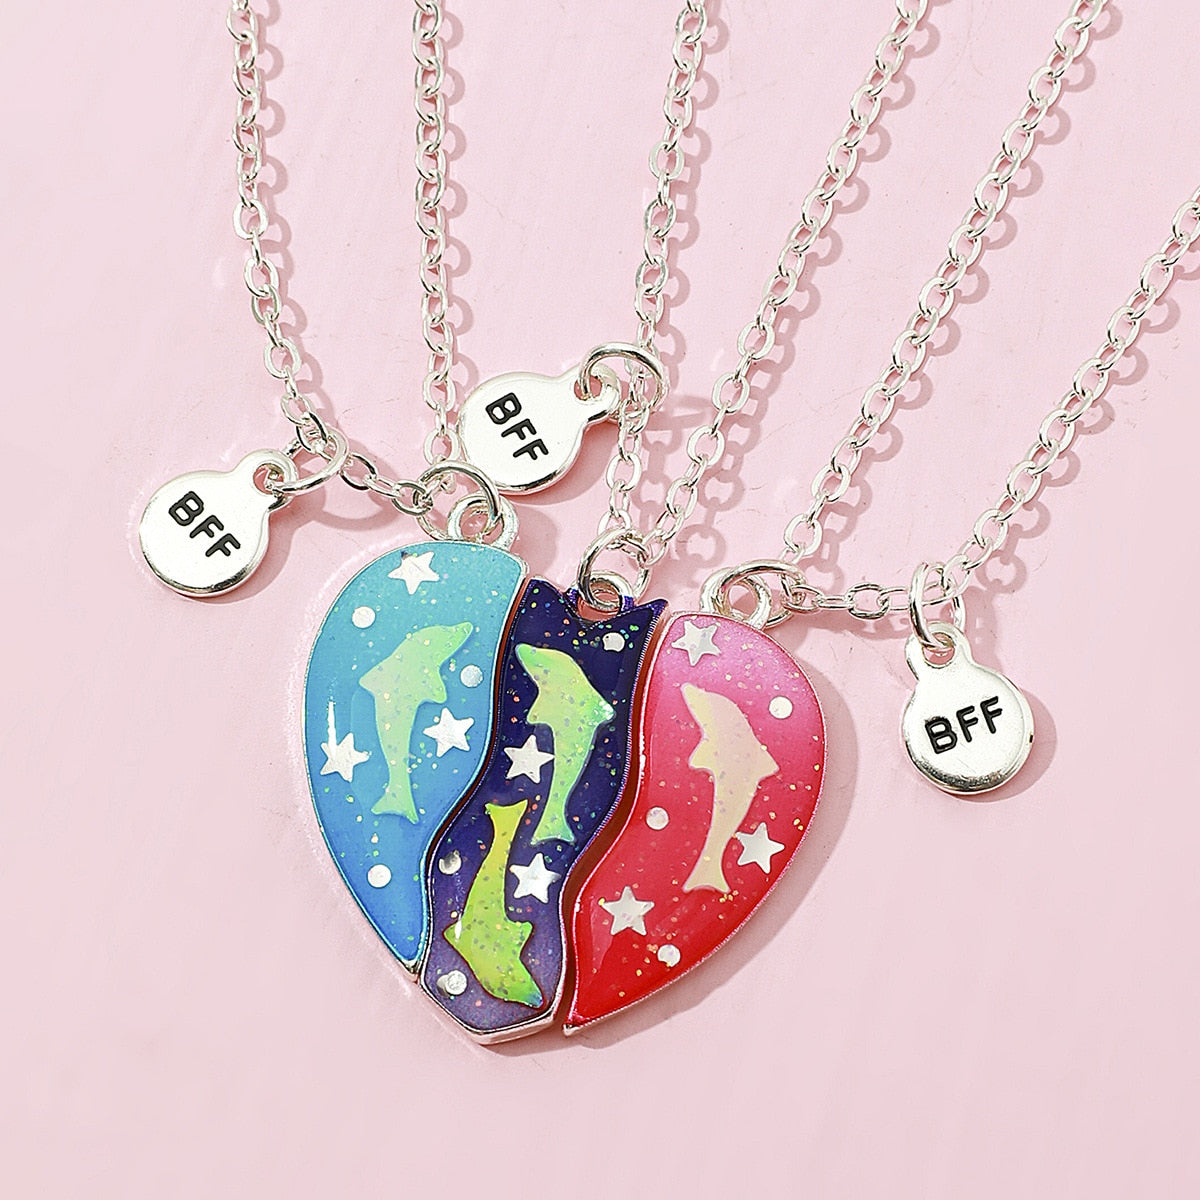 New 3 pack Bff Heart Pendant Necklace Colourful Broken Heart Pendant Chains Necklace For Women Girls Gift